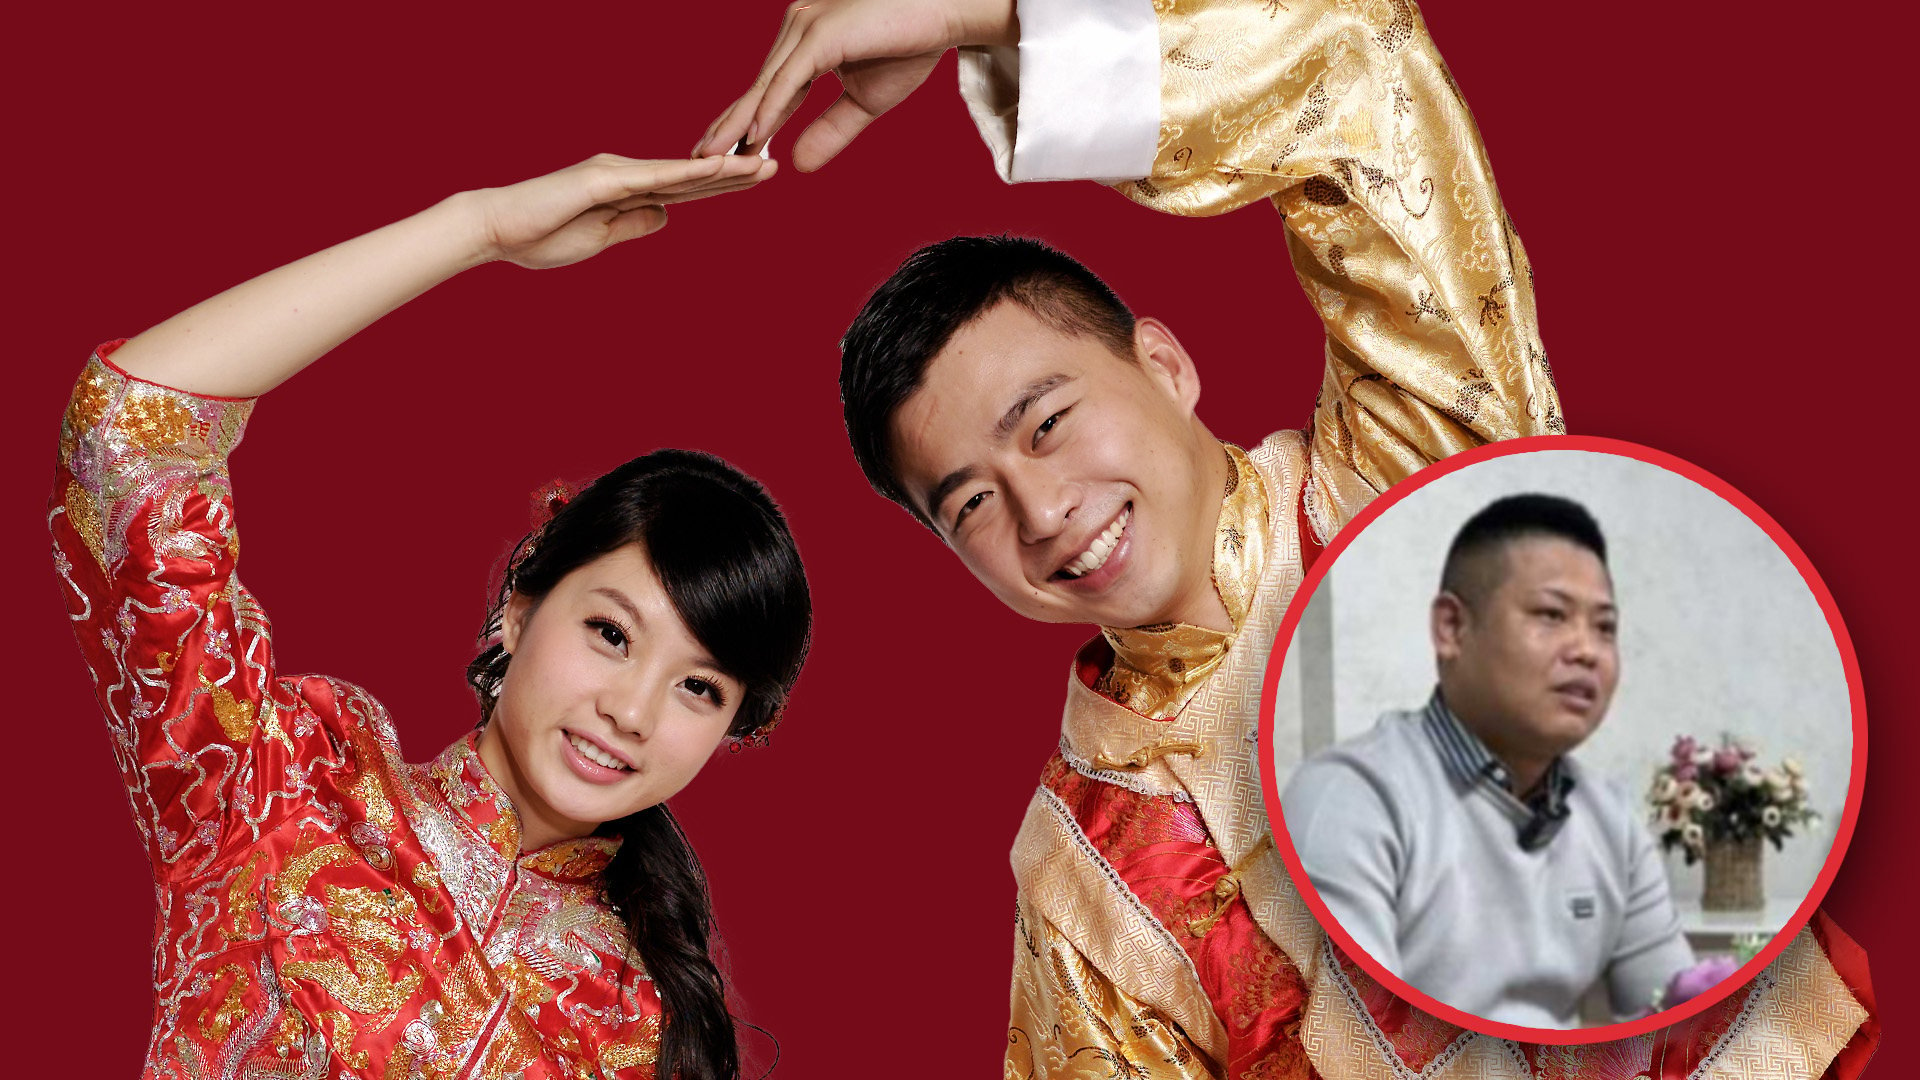 A man in China who failed to find a life partner after 20 blind dates has become a matchmaker and found love for more than 300 couples over seven years. Photo: SCMP composite/Shutterstock/Douyin